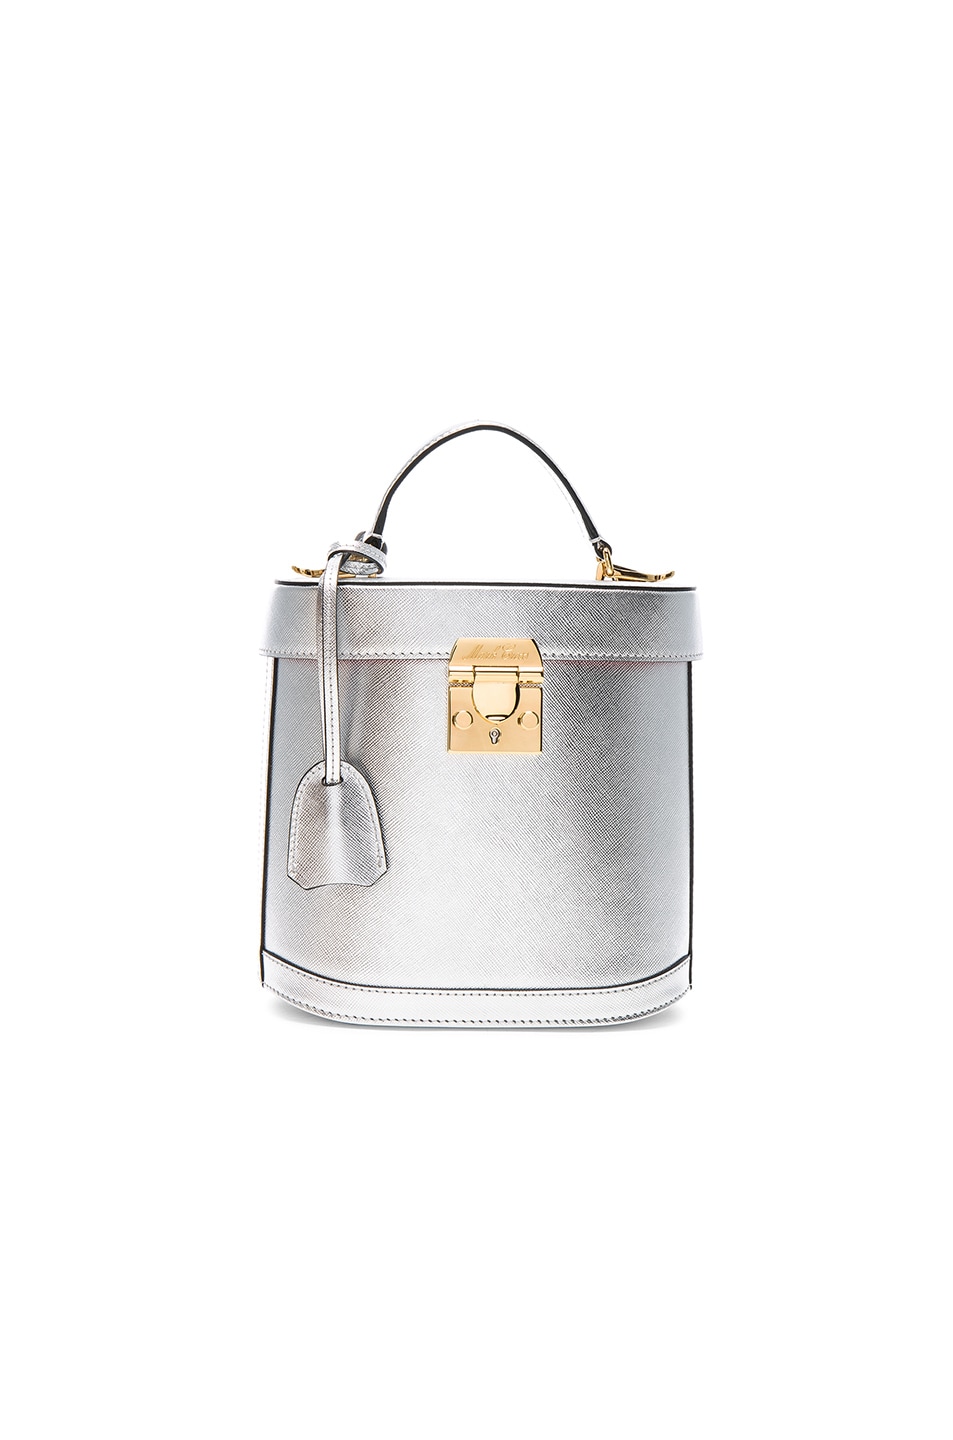 Image 1 of Mark Cross Benchley Bag in Silver Metallic Saffiano